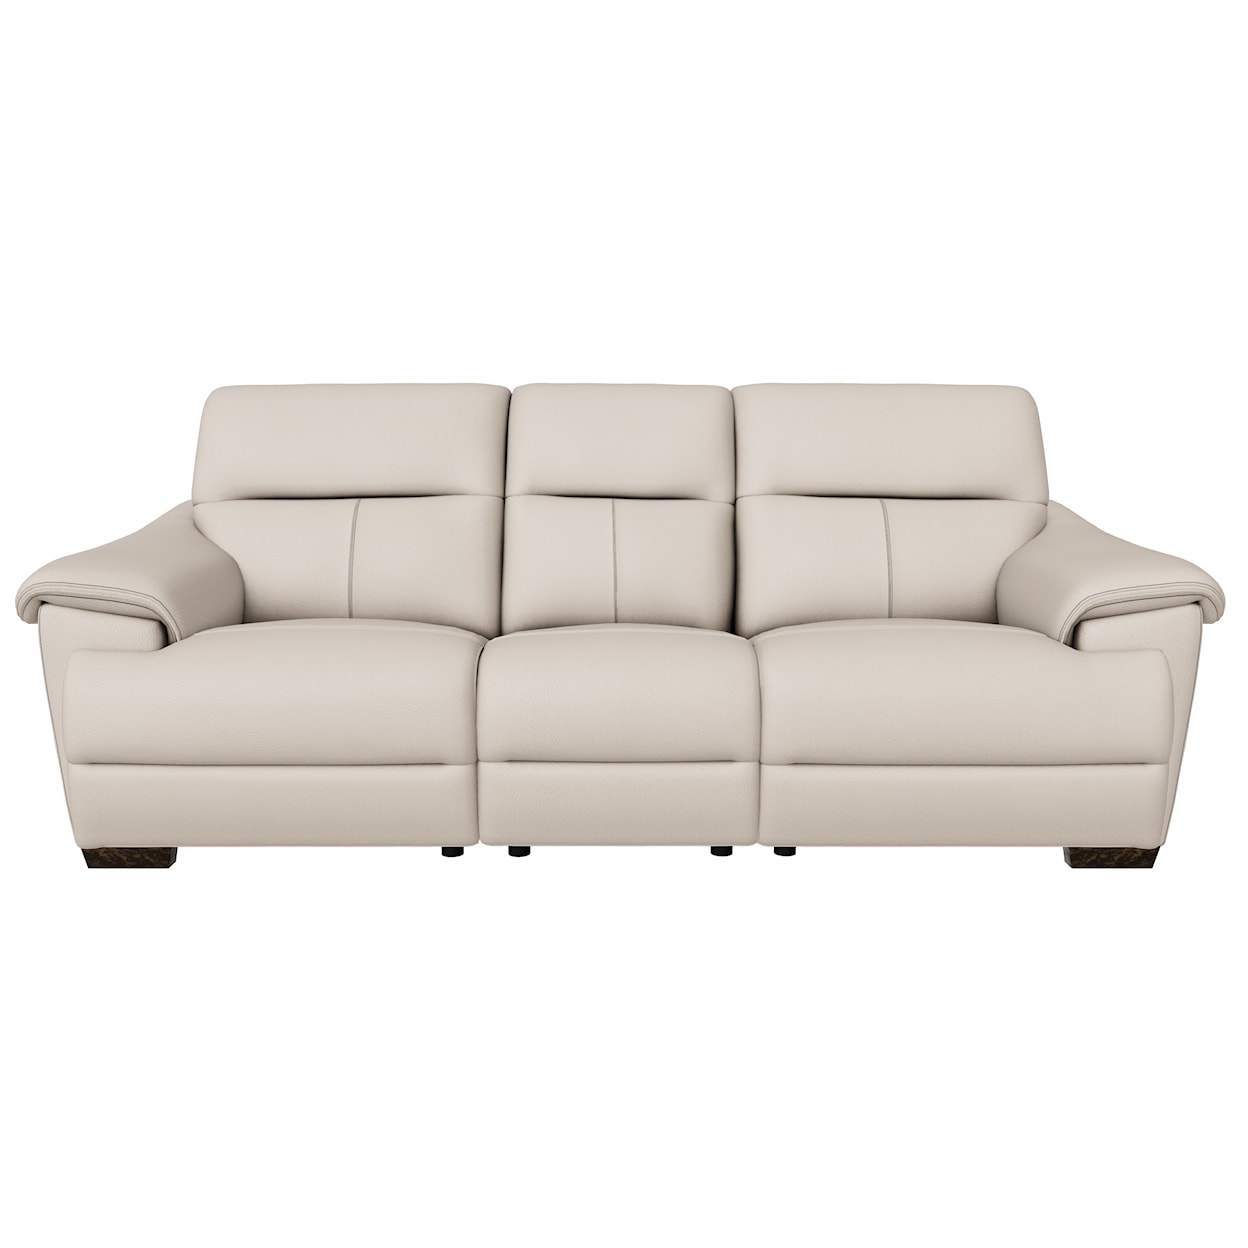 Tufted White Leather Sofa - Foter